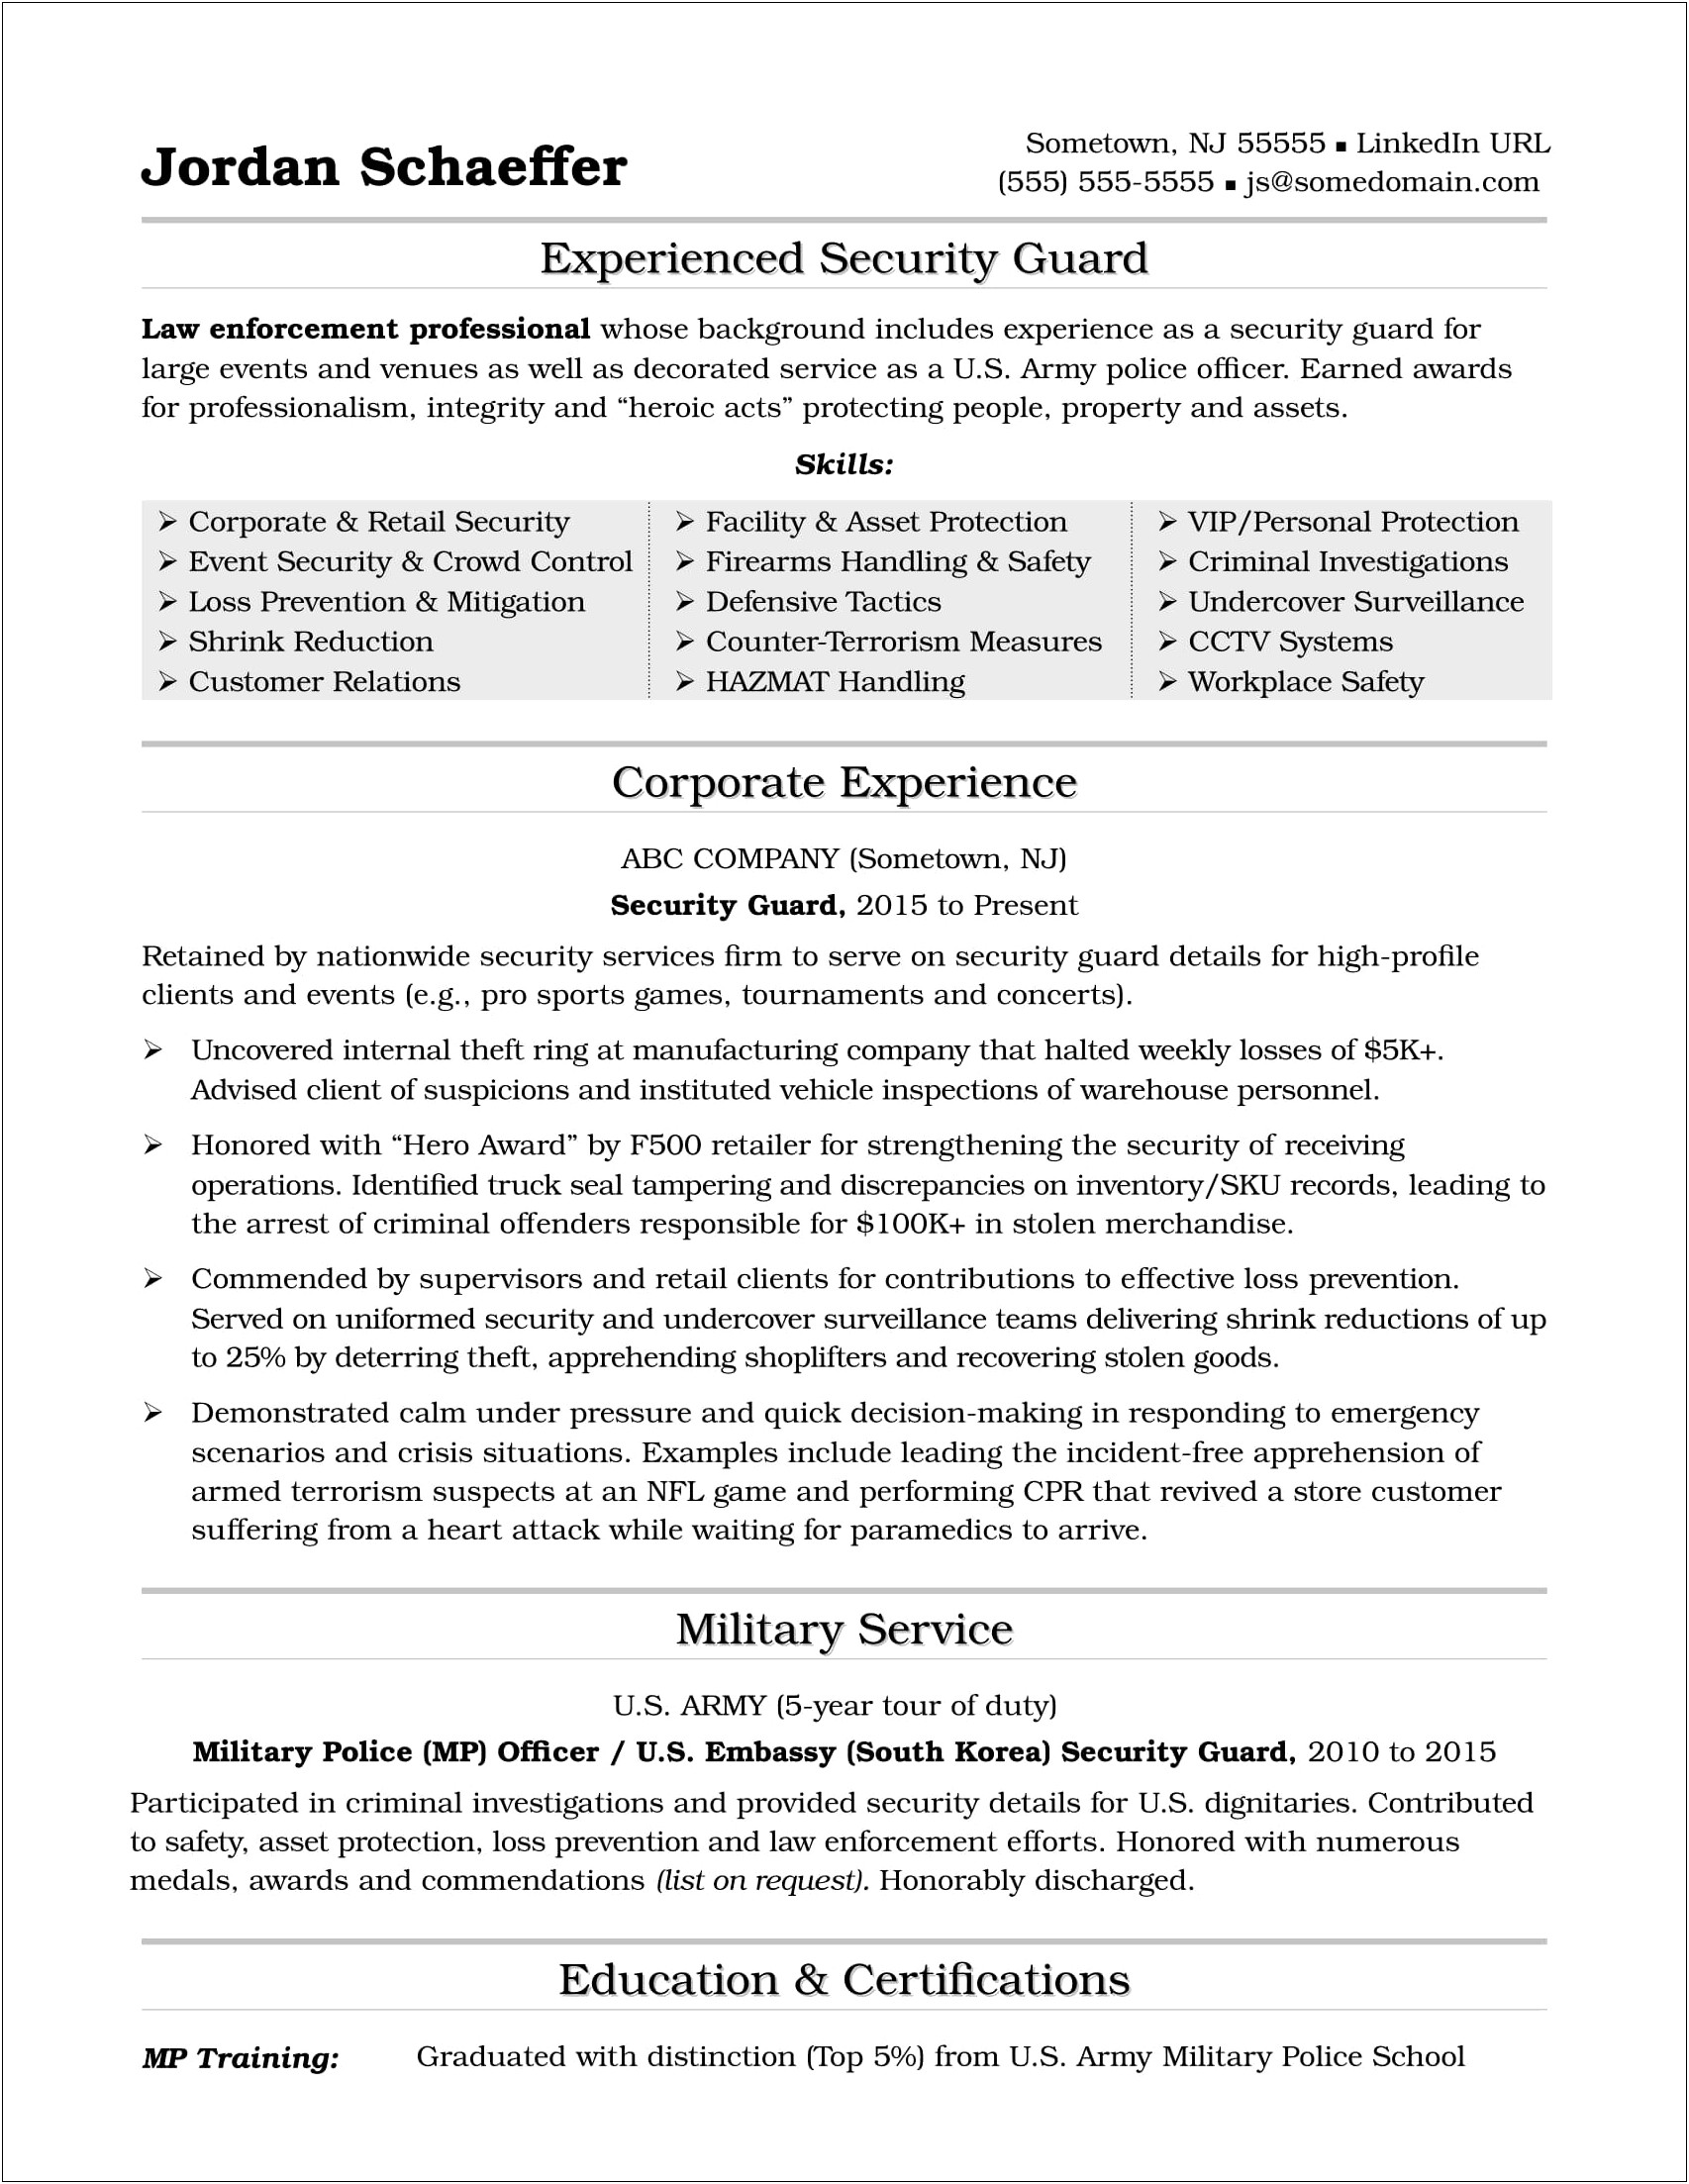 Skills For A Resume Security Job